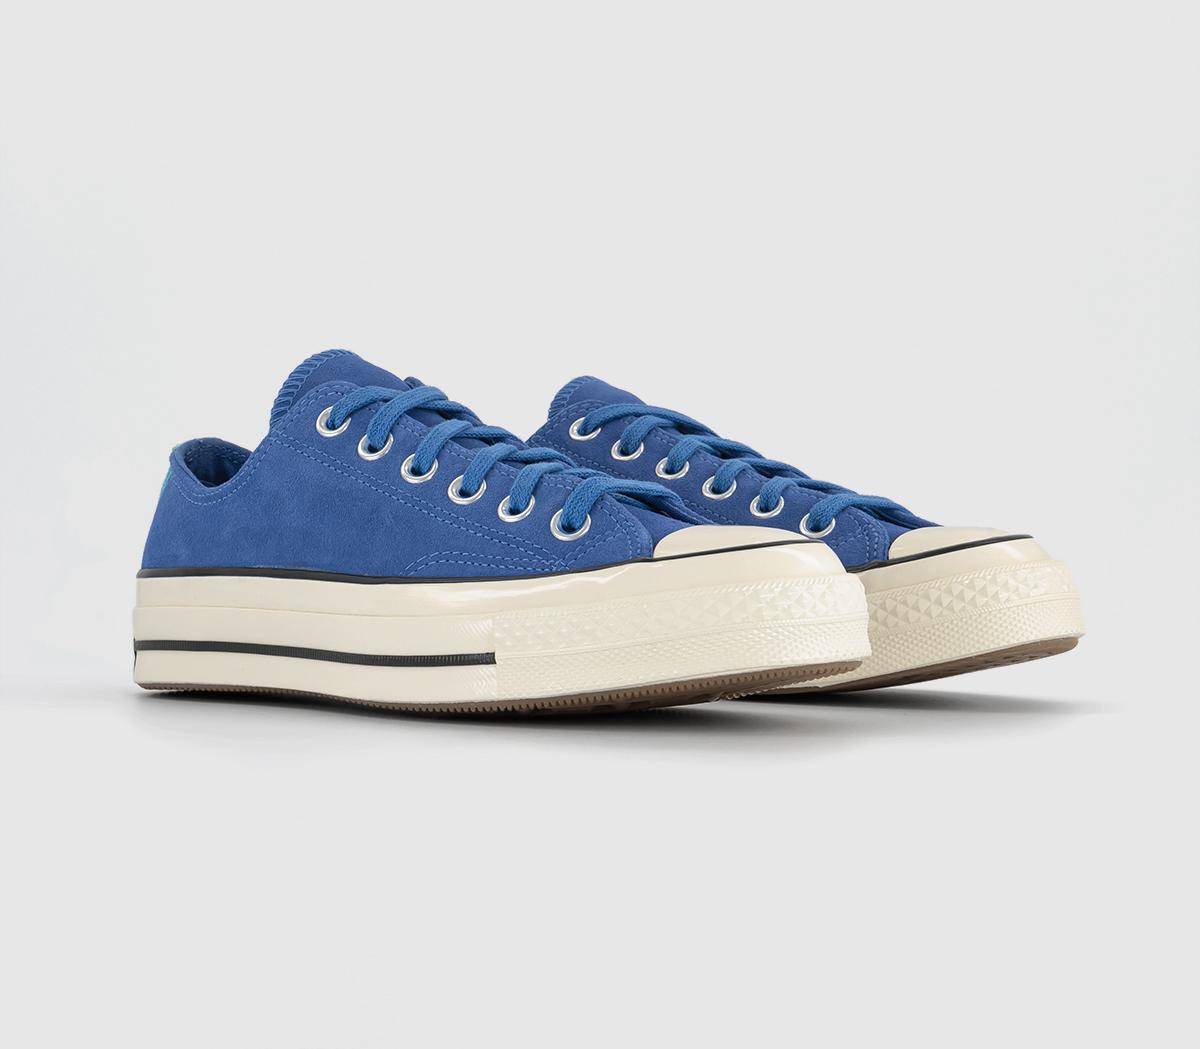 Converse All Star Ox 70s Trainers Ancestral Blue Egret Black, 5